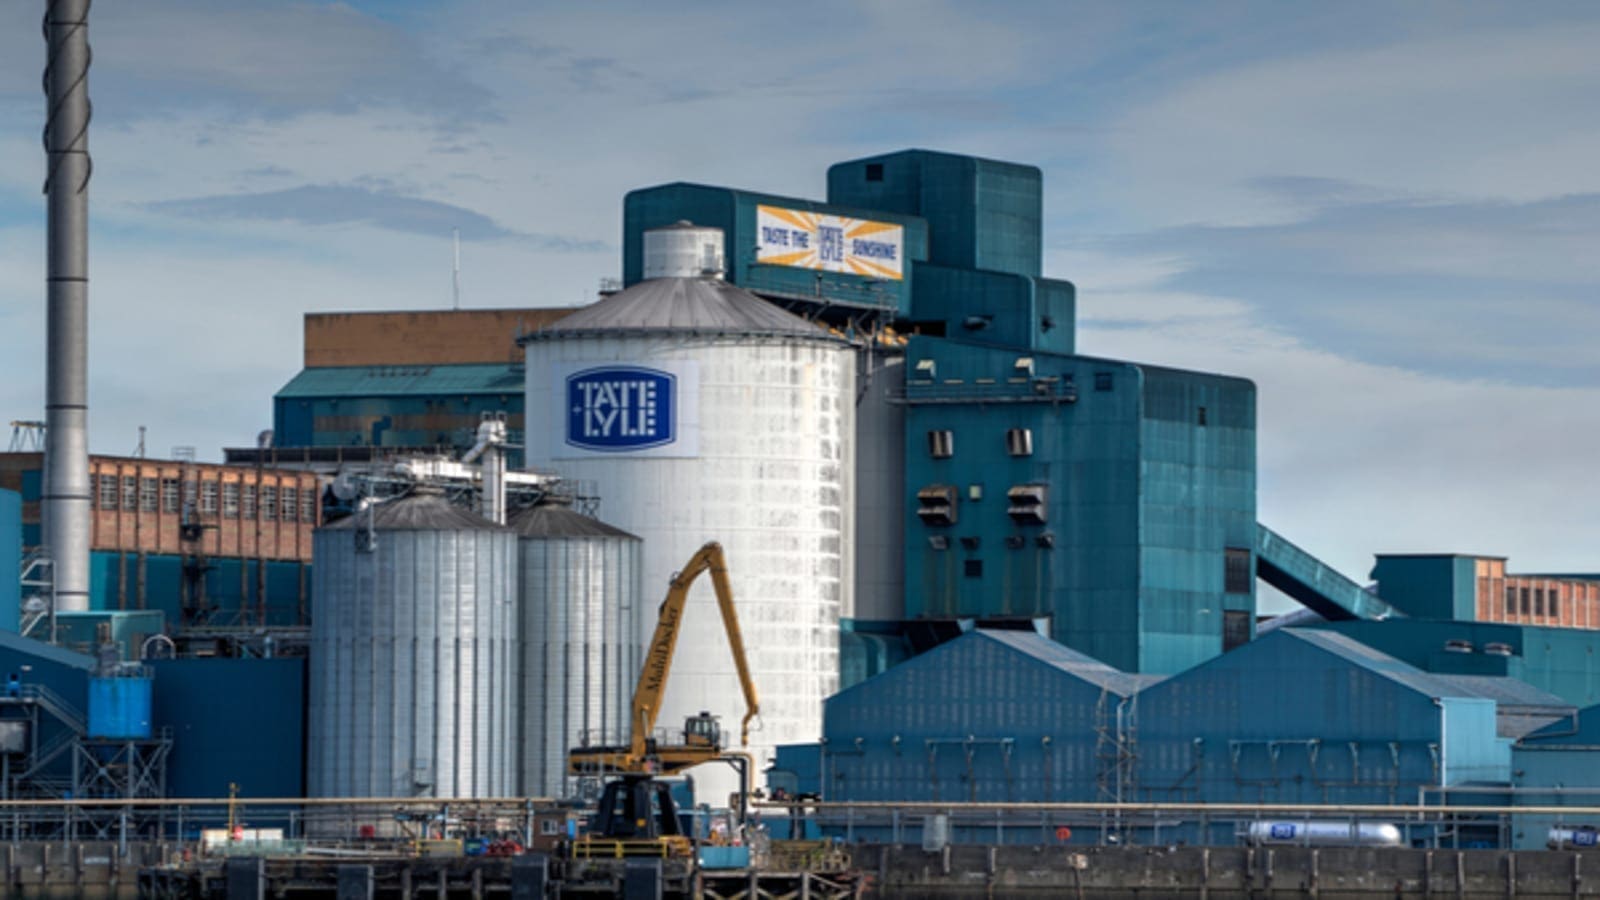 Tate & Lyle rids operations of coal, to distribute Nutriati’s chickpea protein ingredients